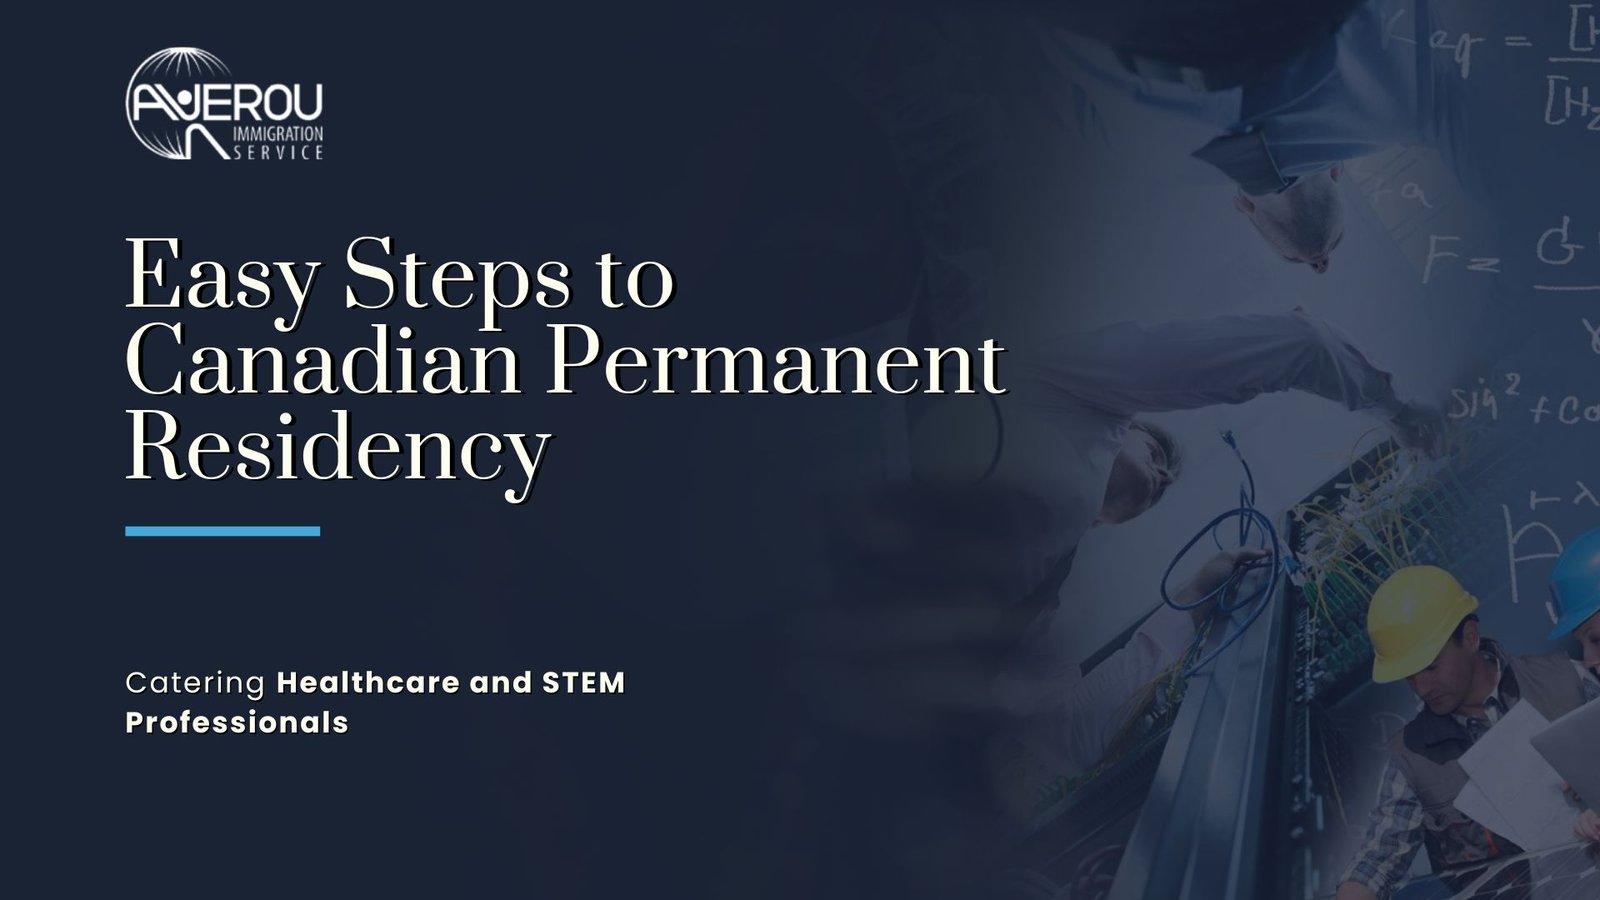 Easy Steps to Canadian Permanent Residency for Healthcare and STEM Professionals